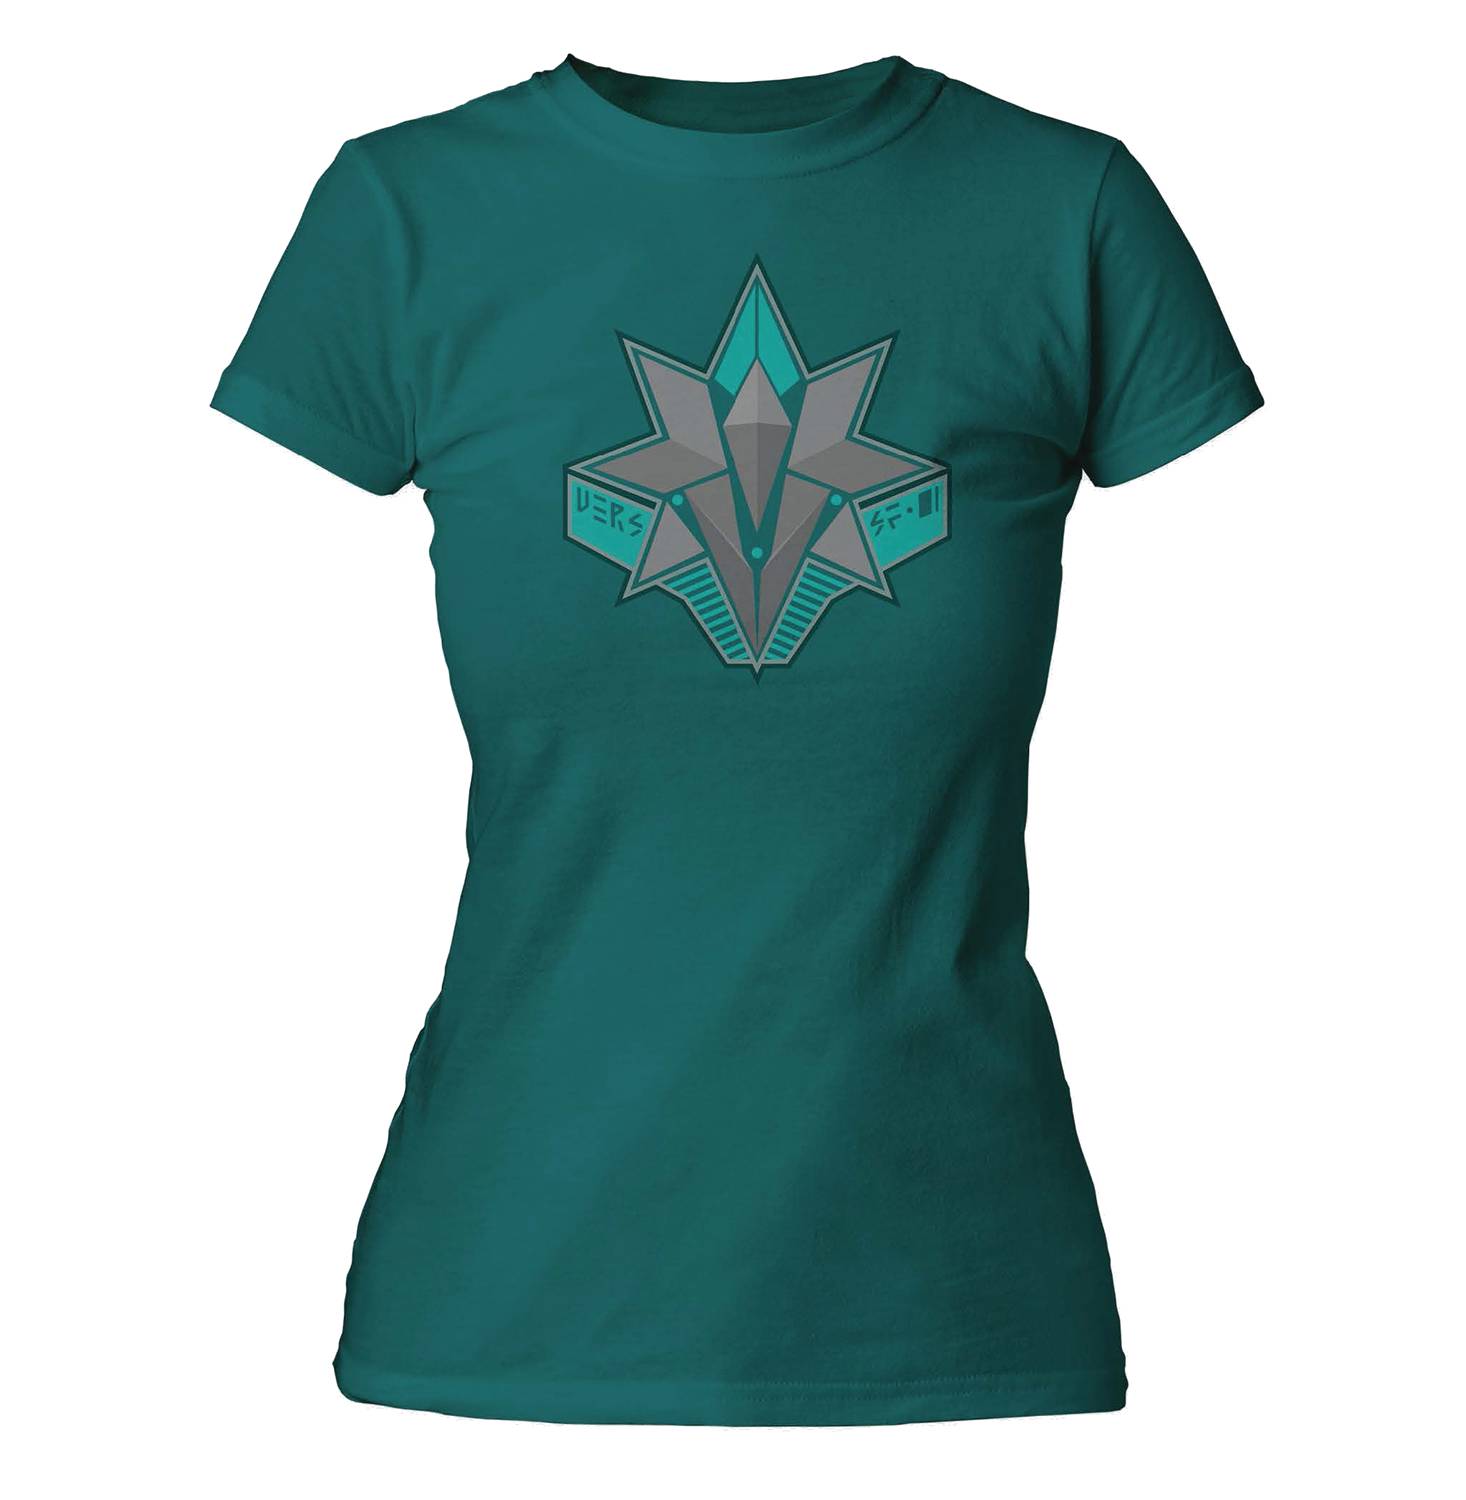 Captain Marvel Ladies Teal Logo Px T-Shirt Small